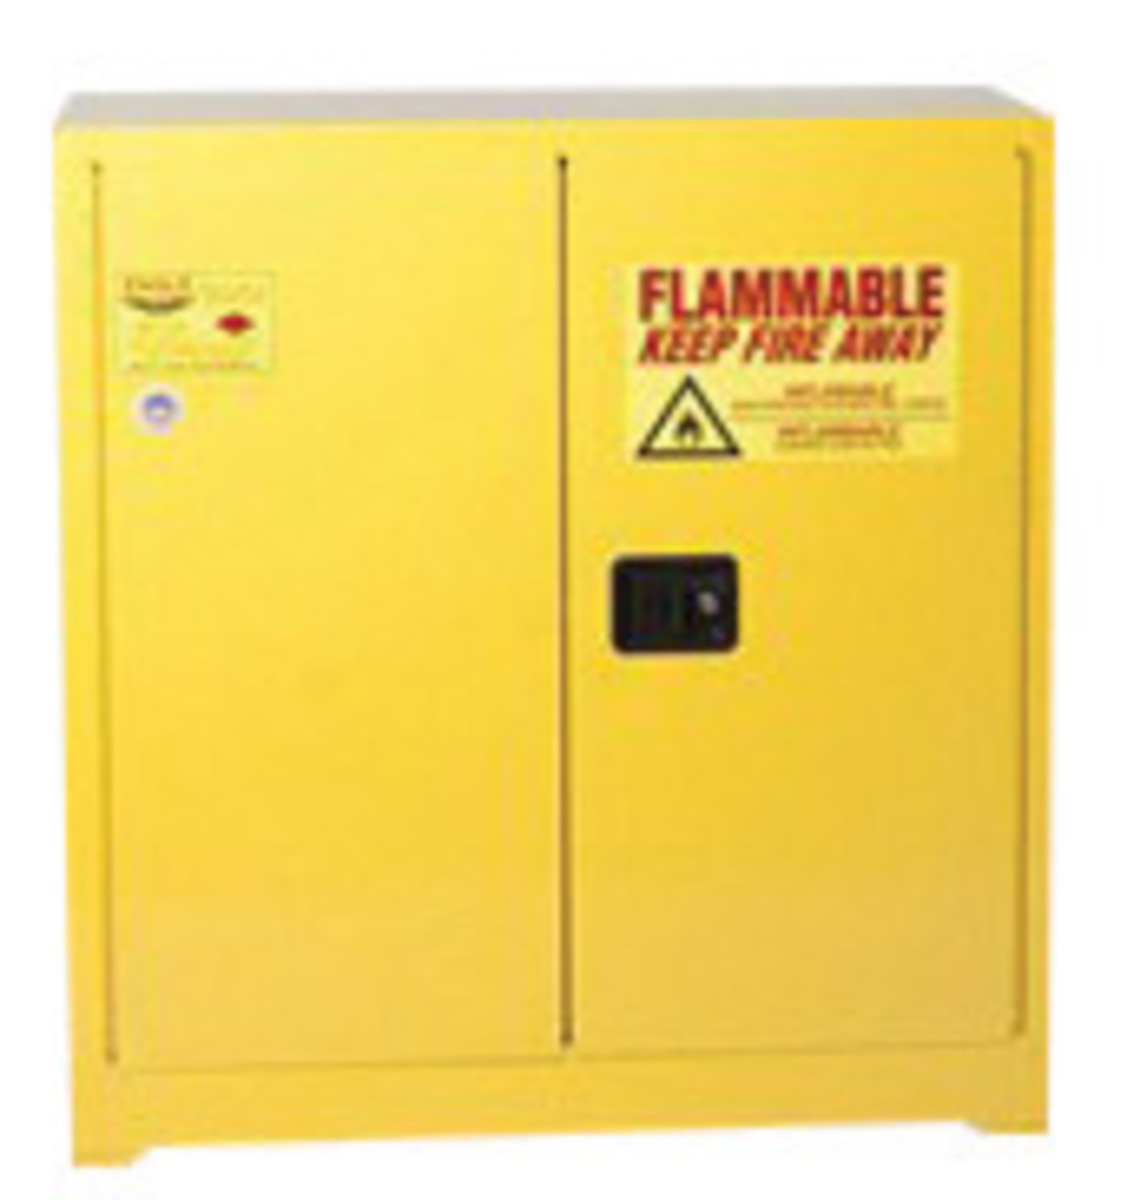 Eagle 24 Gallon Yellow 18 Gauge Steel Safety Storage Cabinet With (1) Self-Closing Door, (3) Shelves, (2) Vents, Warning Labels